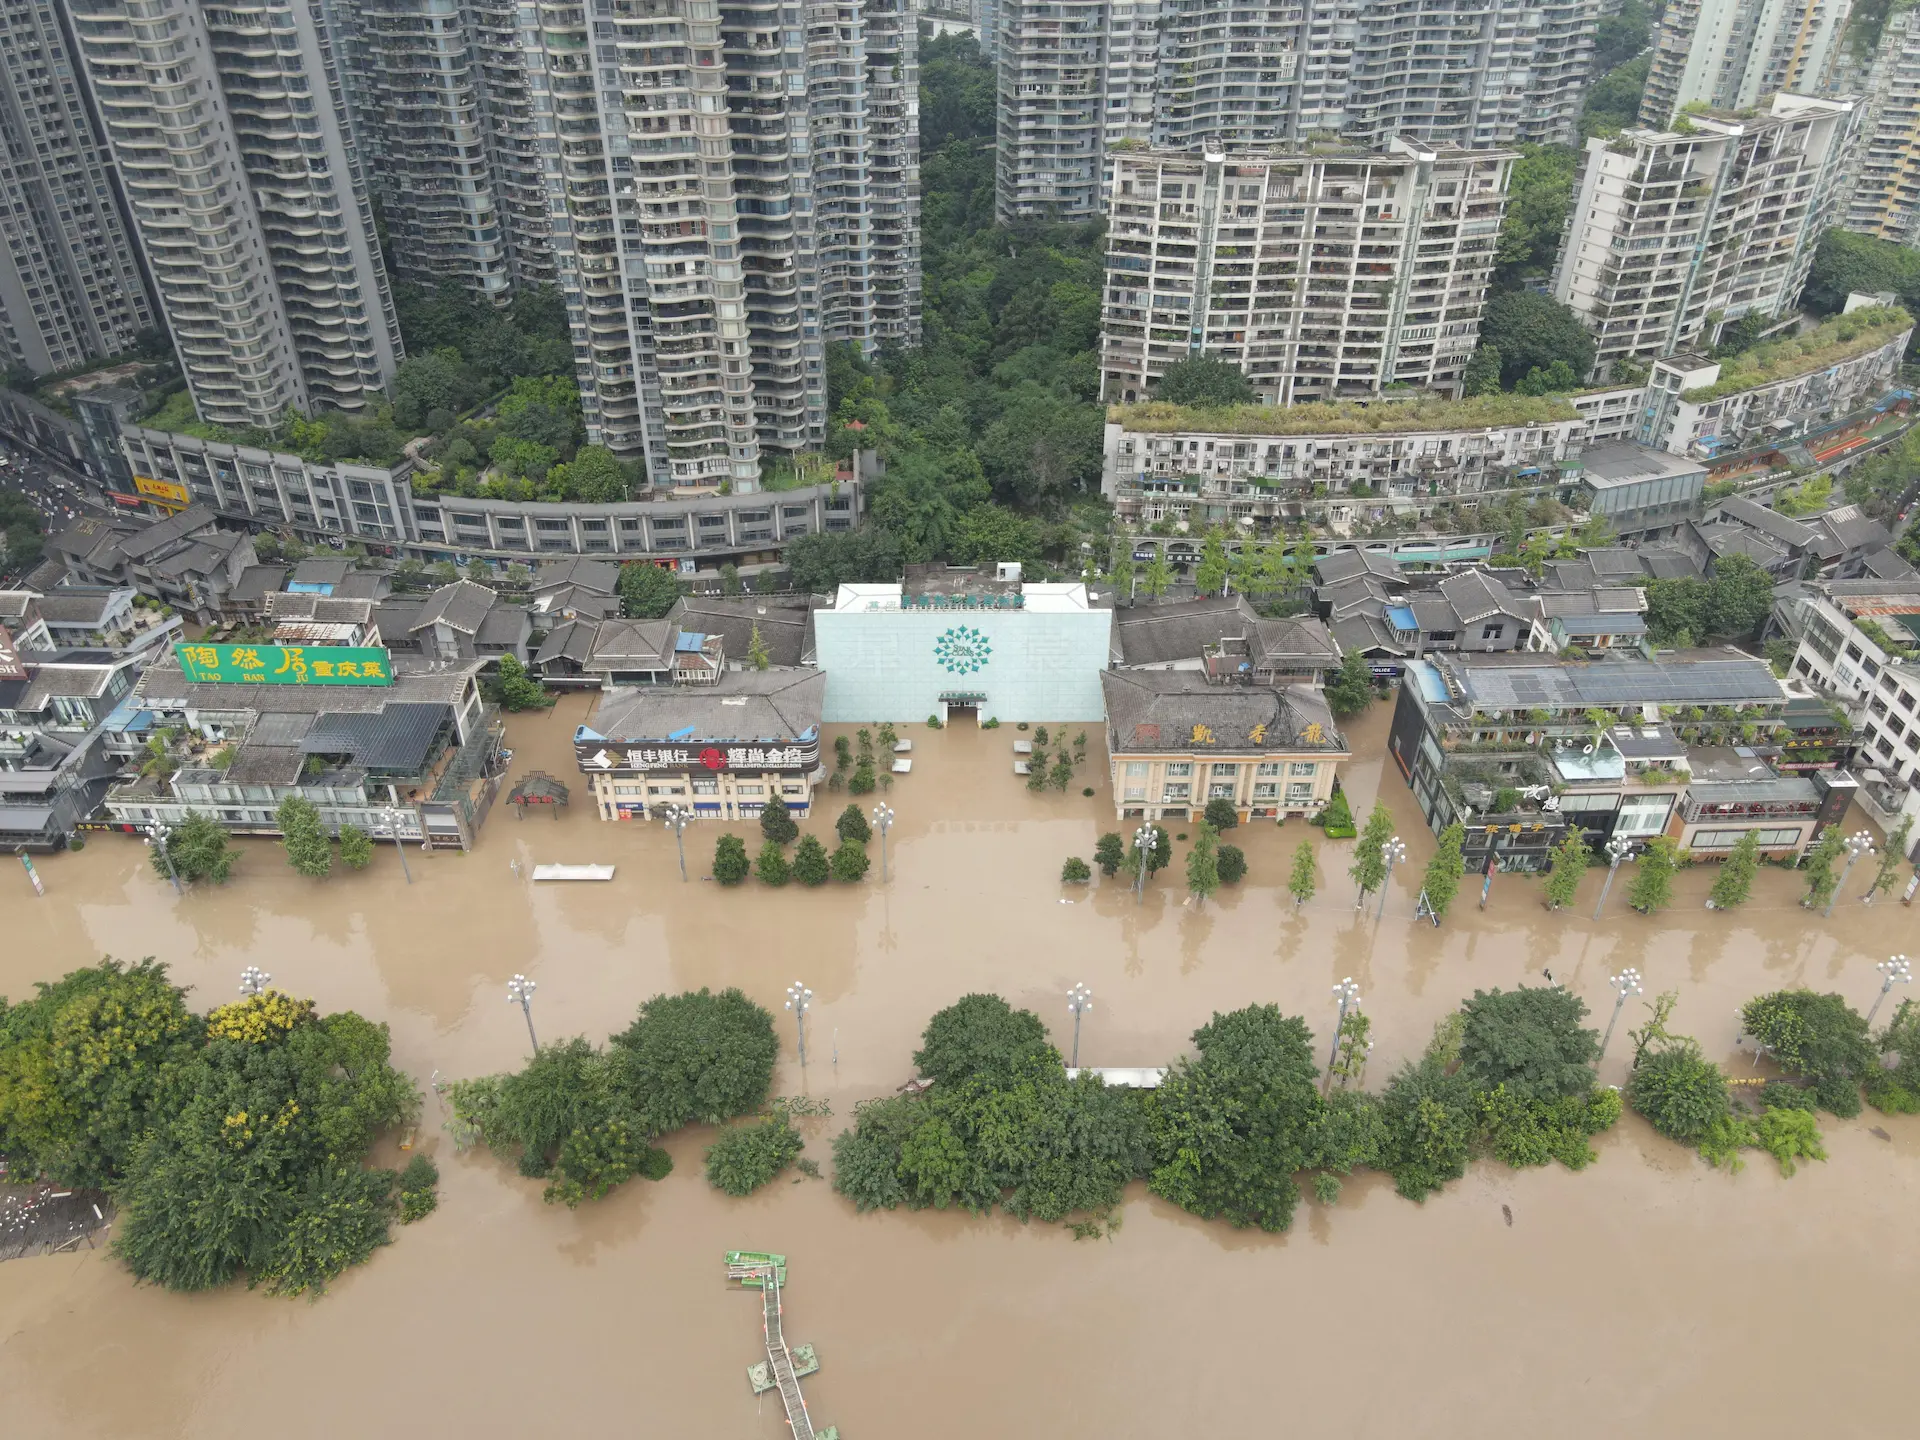 Nan'an District in southwest China's Chongqing was hit by severe flooding in 2020